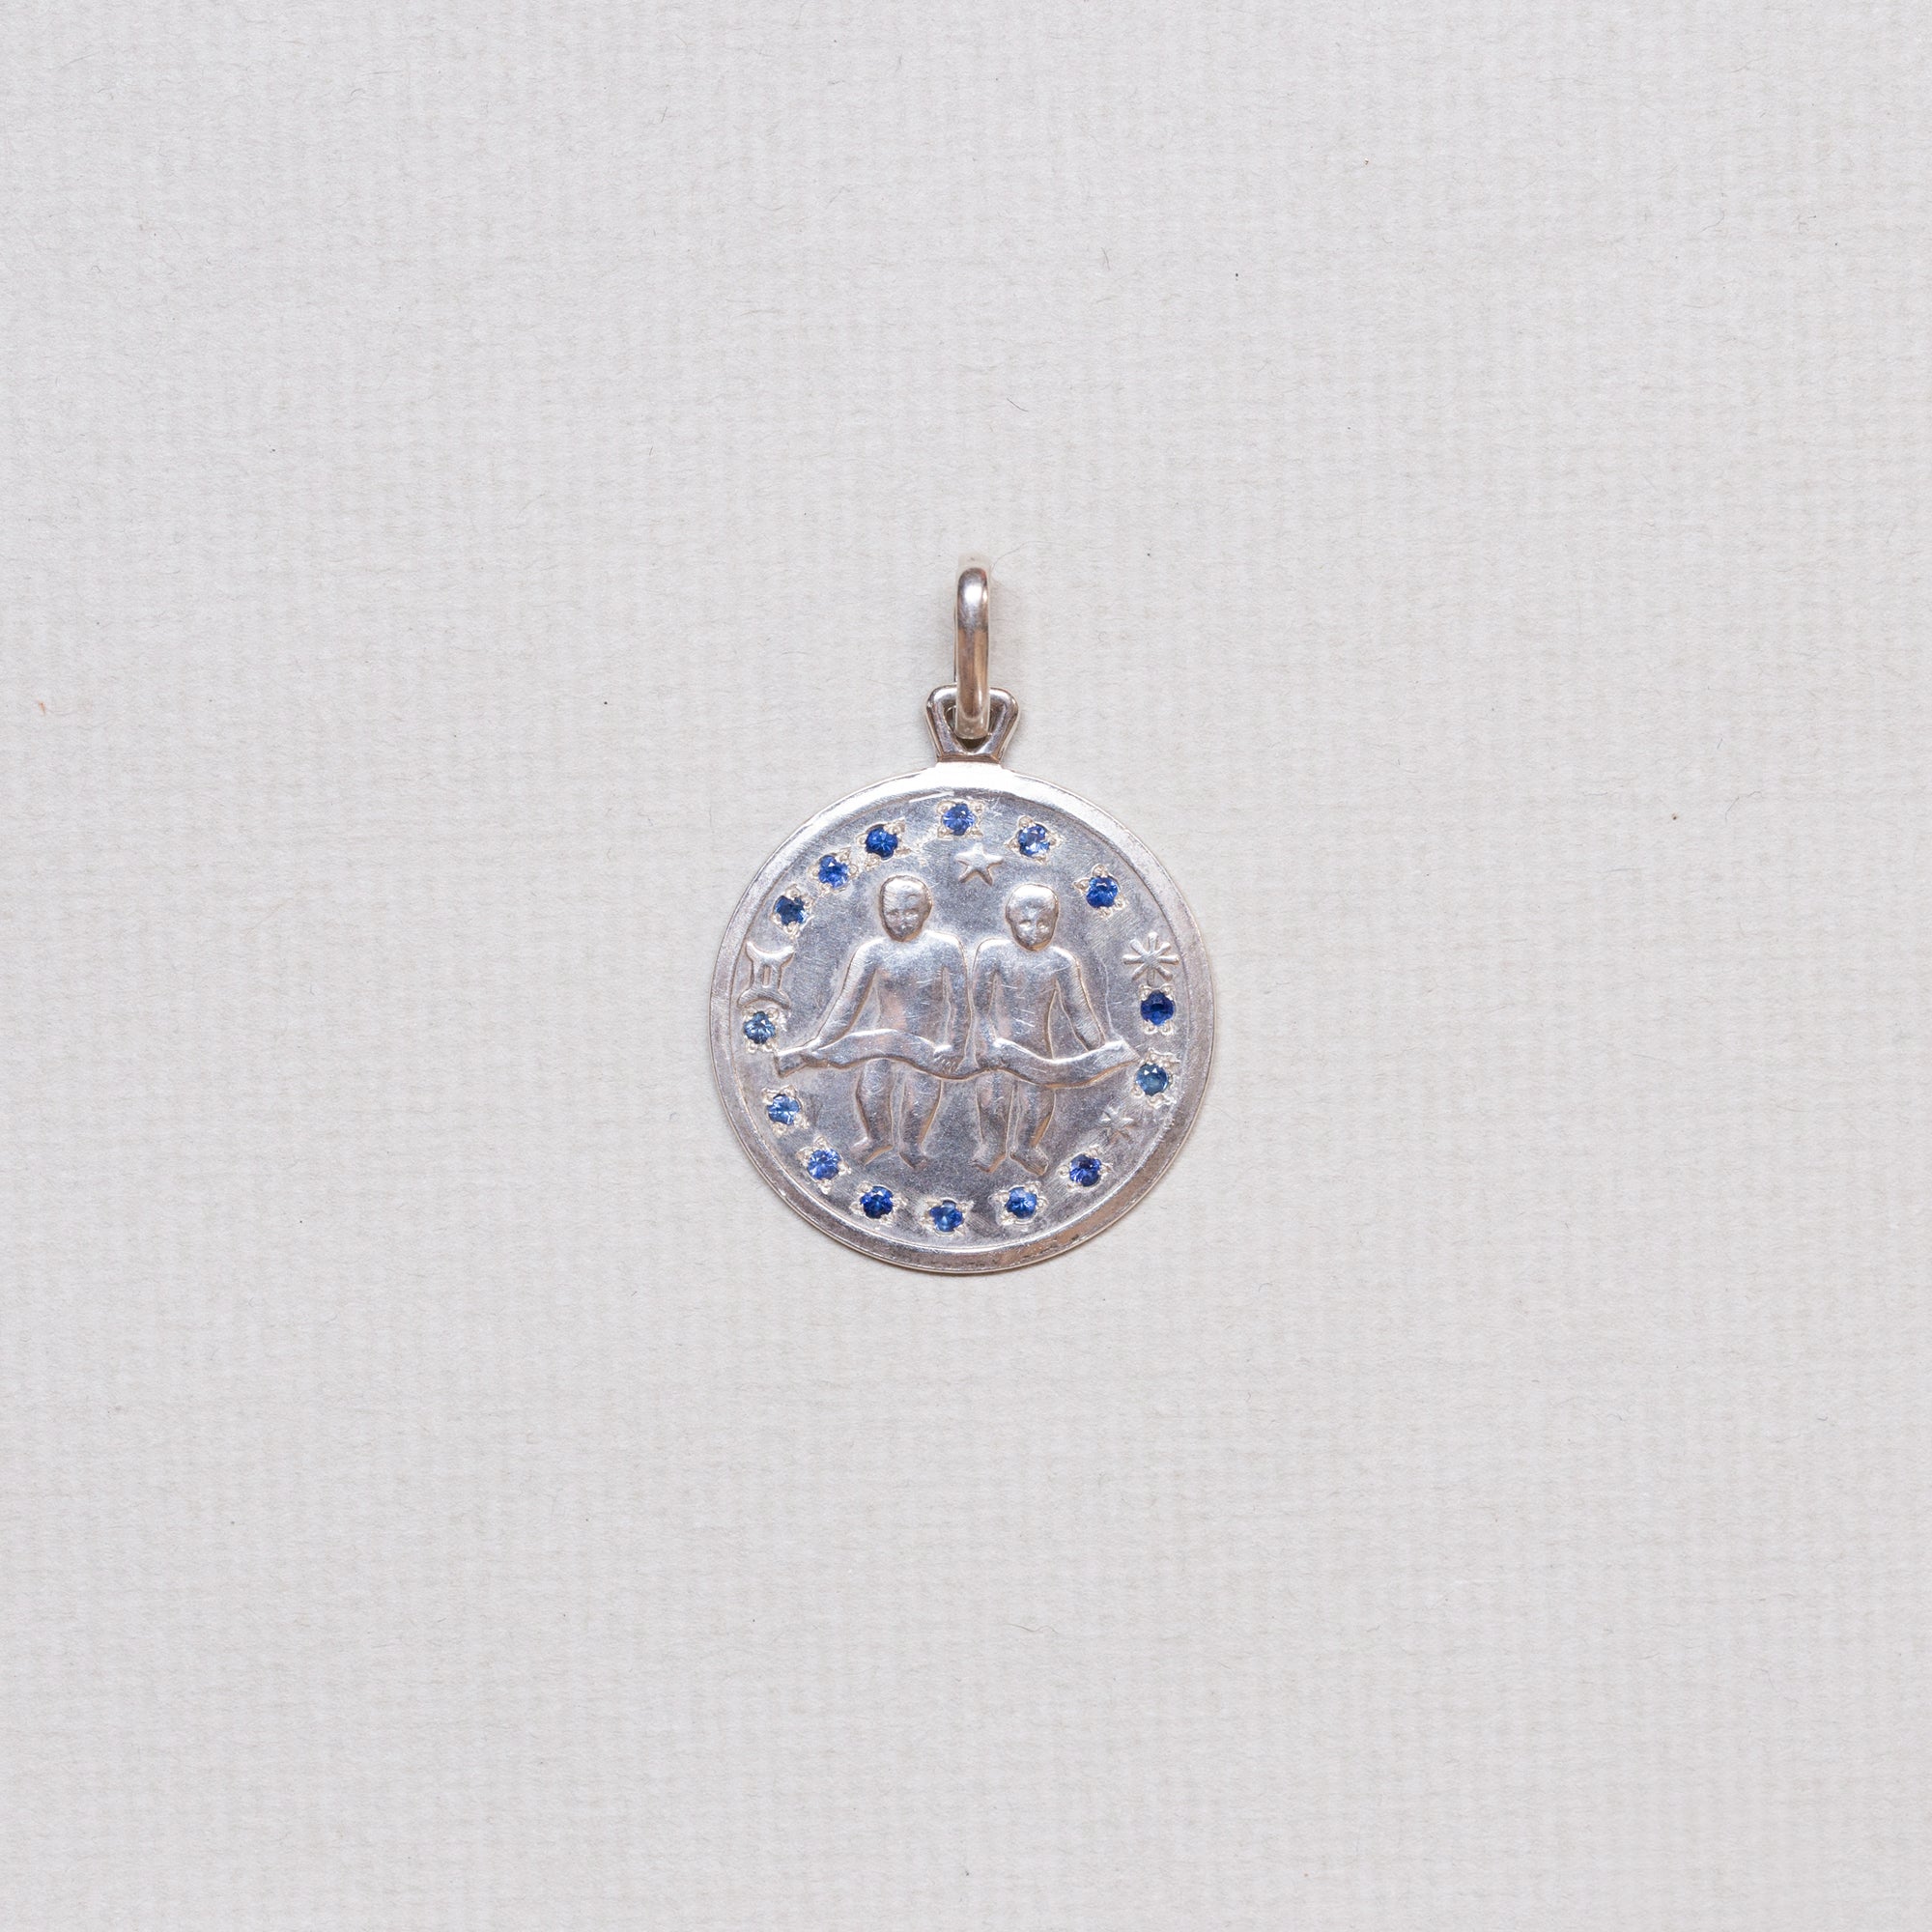 Vintage Sterling Silver "Gemini" Charm Pendant with Sapphires